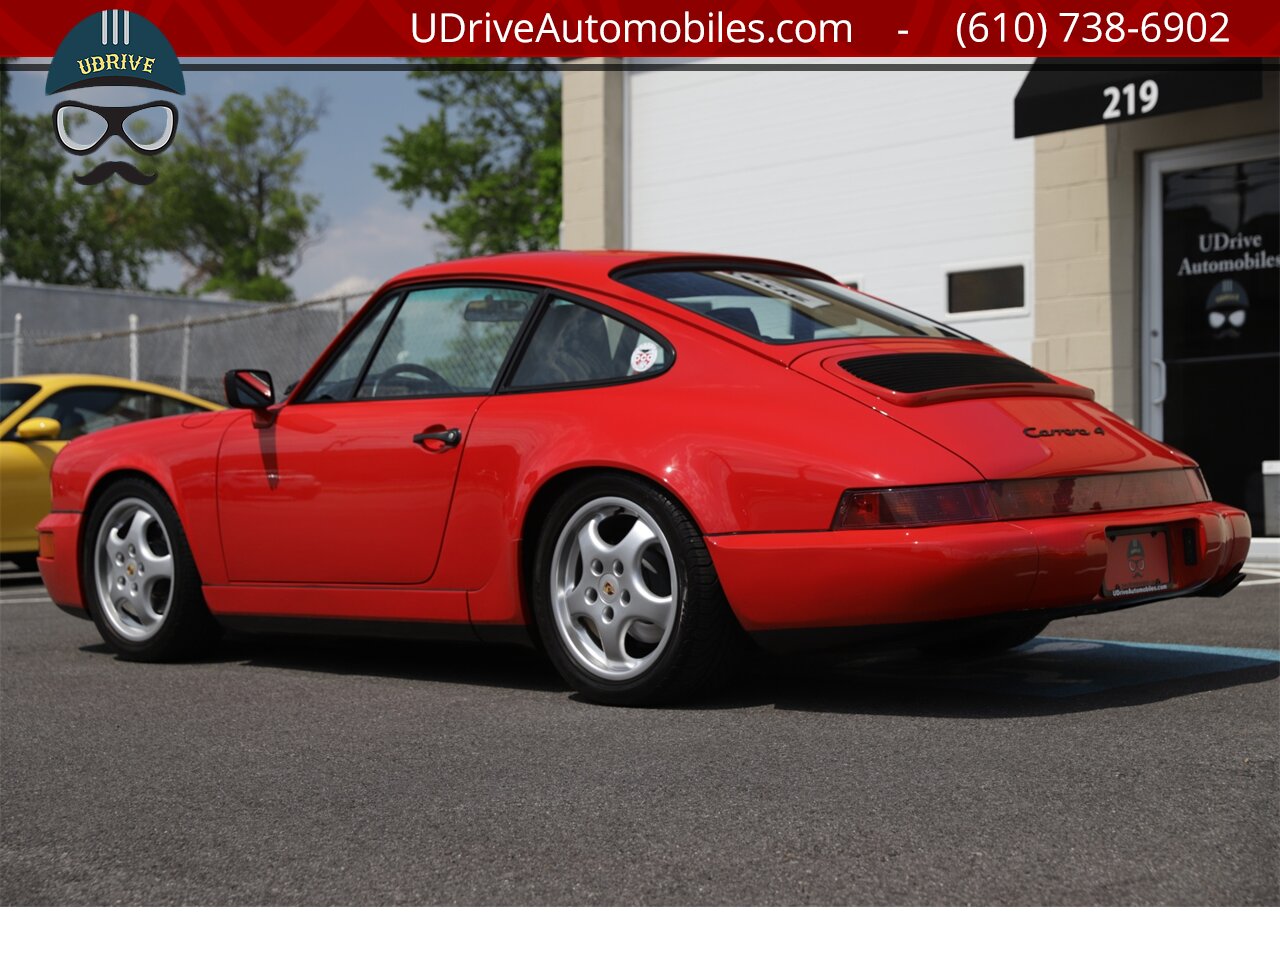 1989 Porsche 911 Carrera 4 964 C4 5 Speed Engine Rebuild  $40k in Service History Cup 1 Wheels - Photo 18 - West Chester, PA 19382